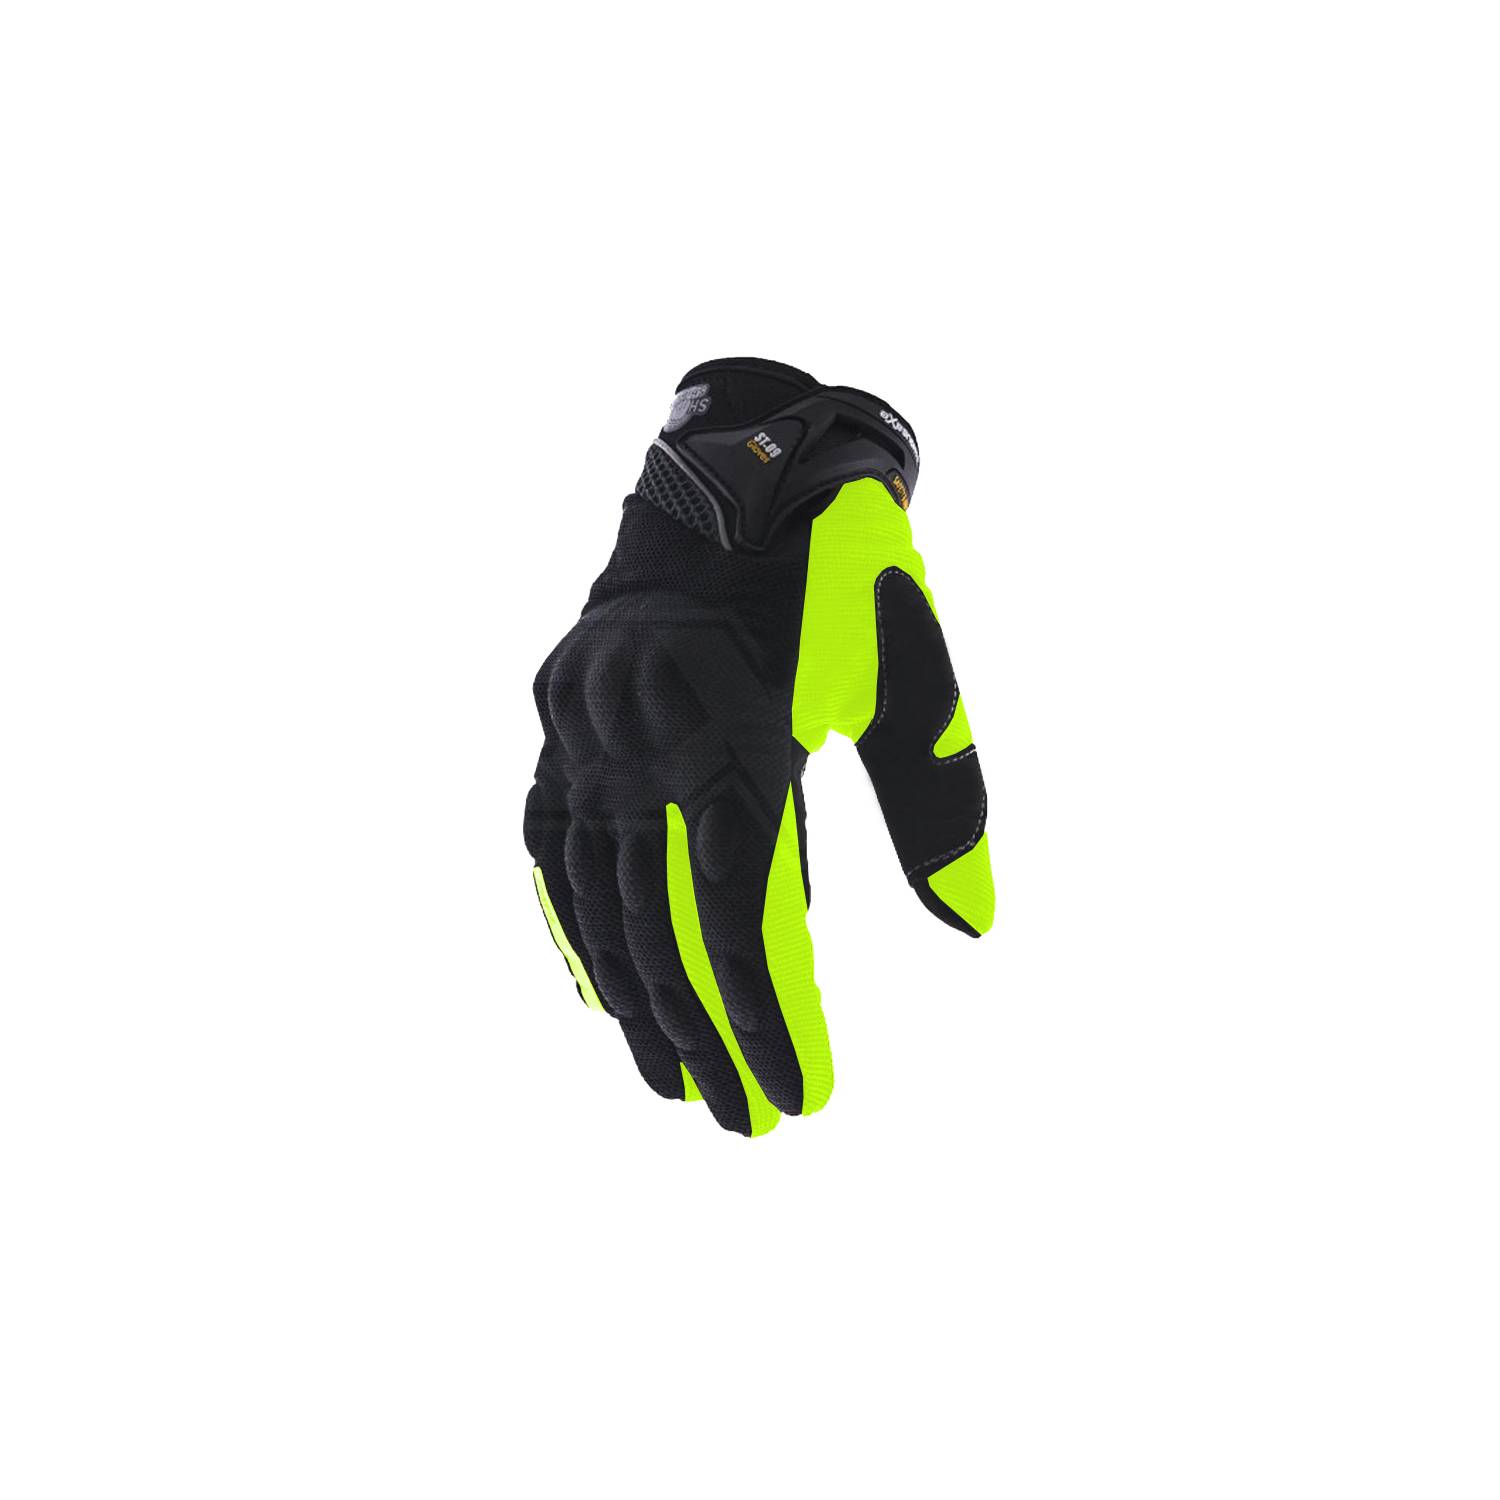 Guantes Tactiles Termicos ST-09 – Moto Store